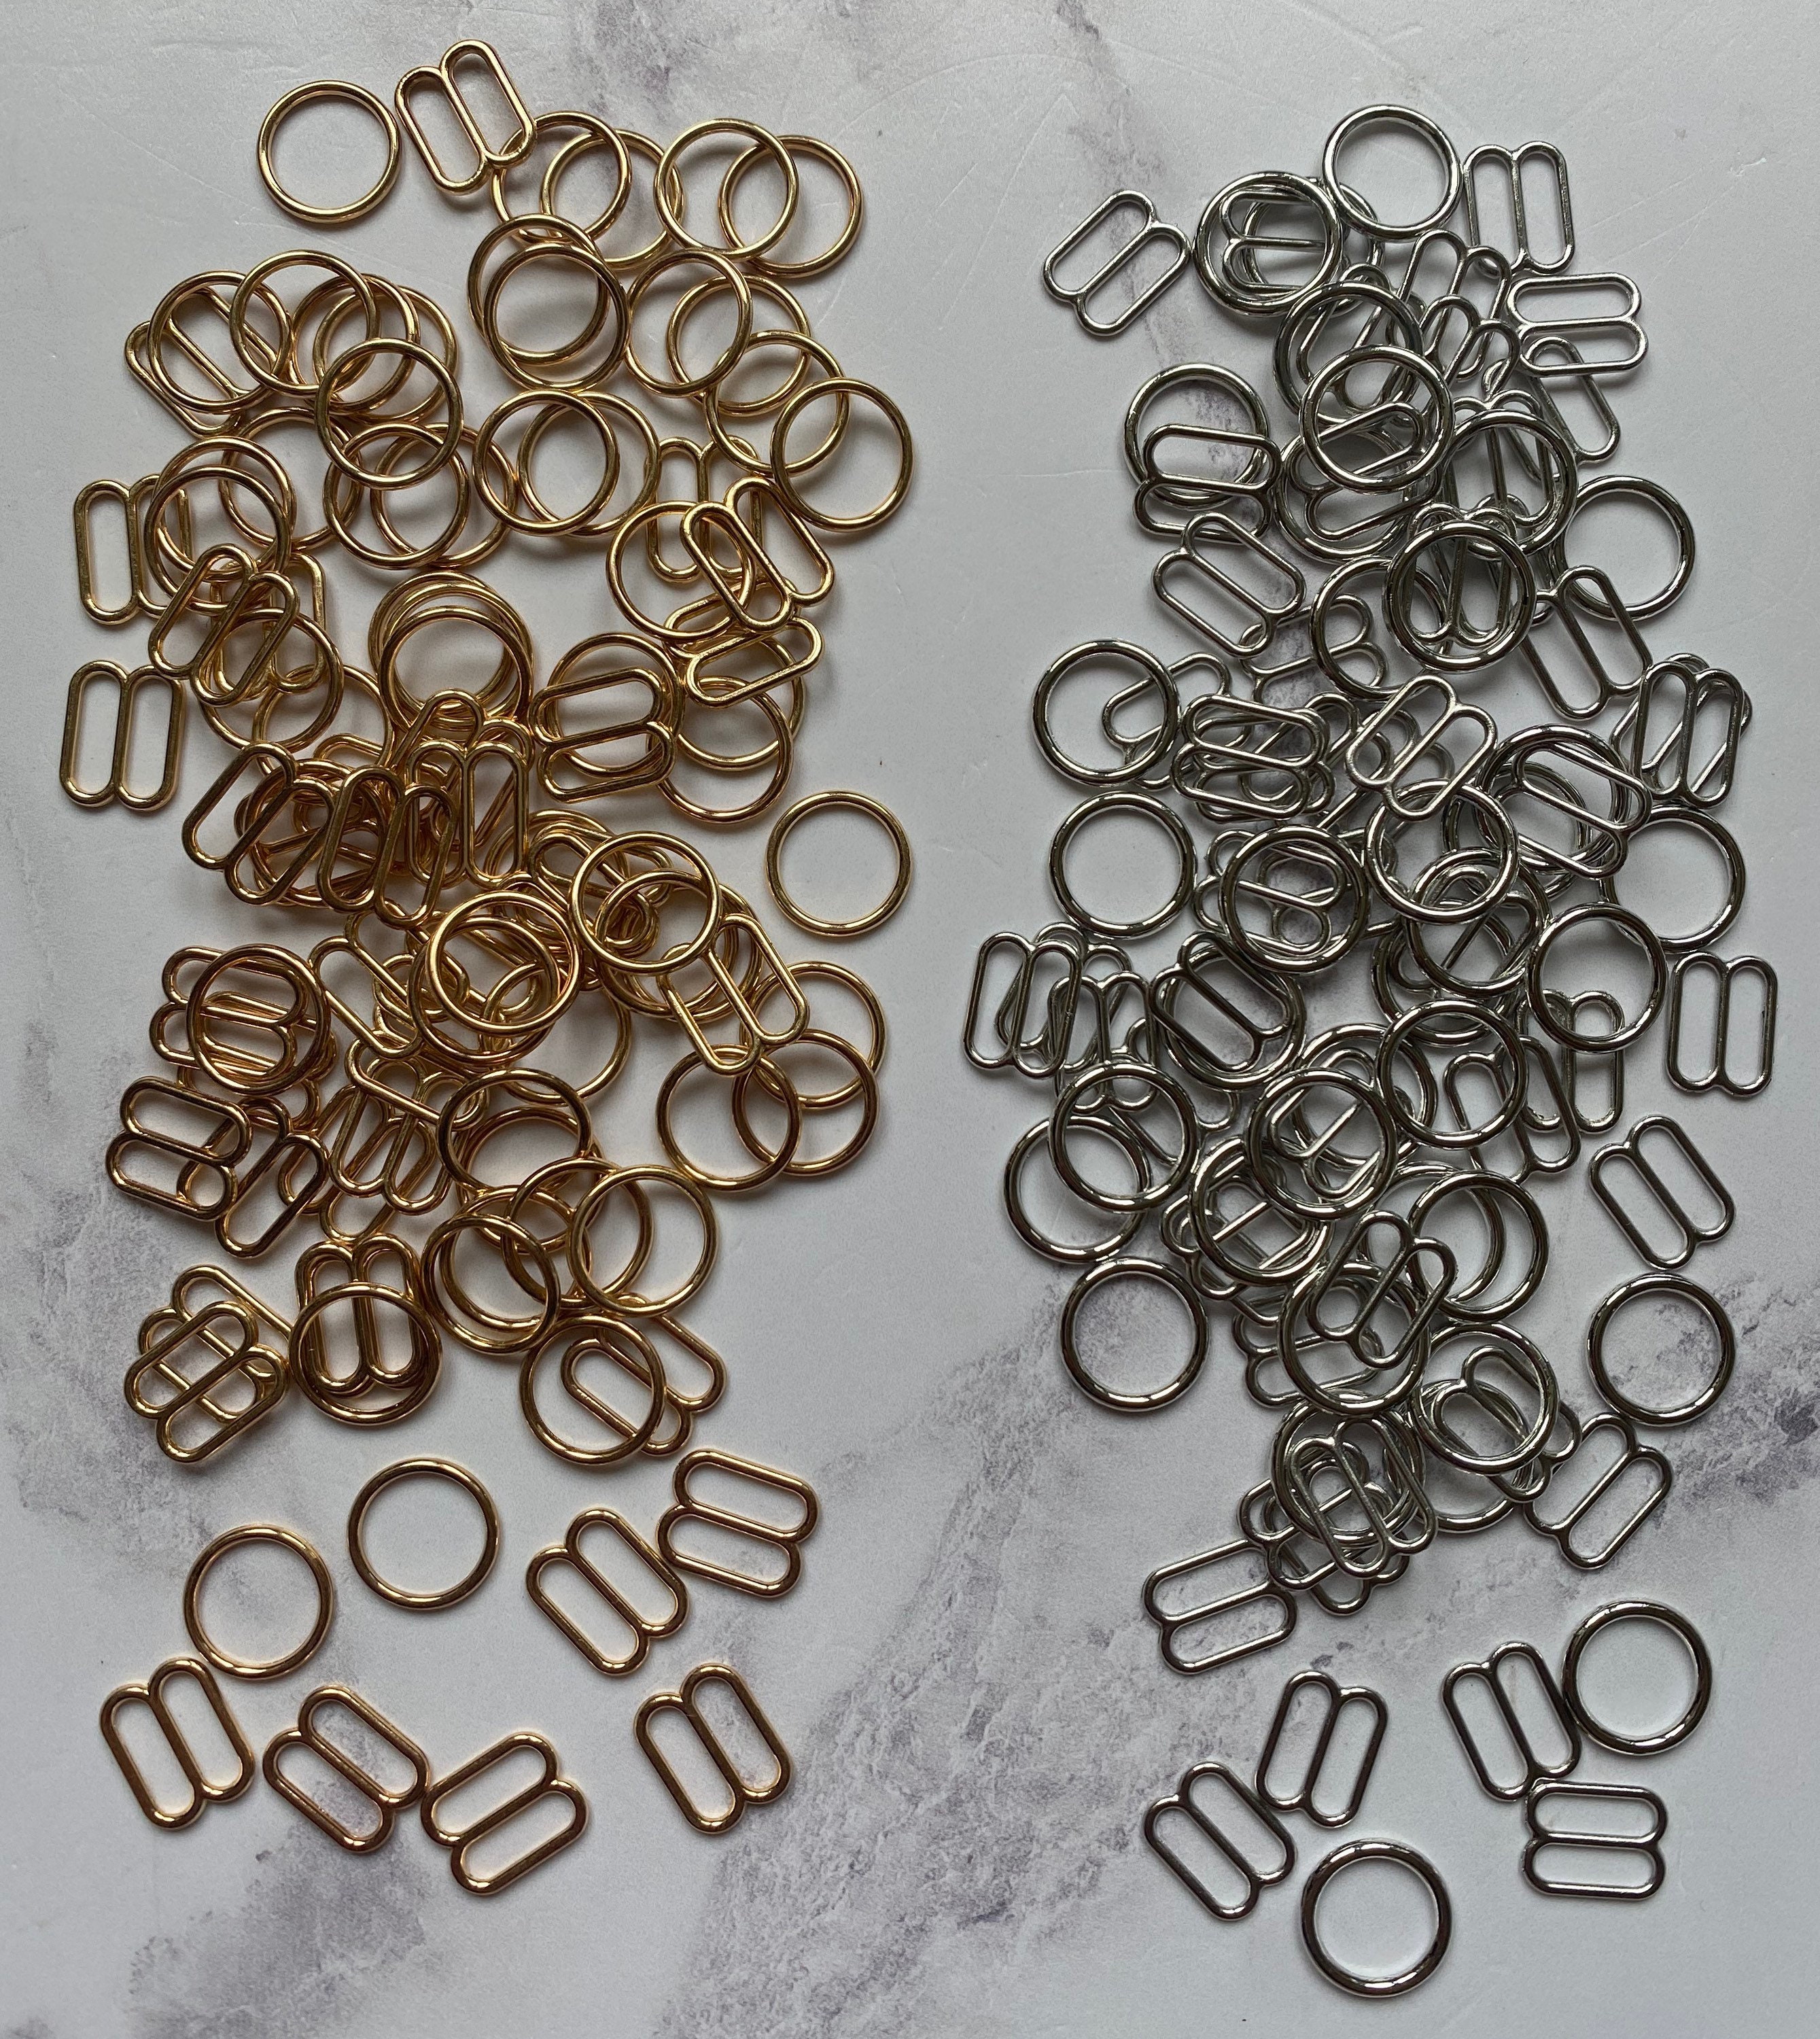 50 Pcs NANSSY 1 Inch/25mm Split Keyrings with Chain Silver Keychain Ring,  Key Chains Rings Parts with Open Jump Ring and Connector